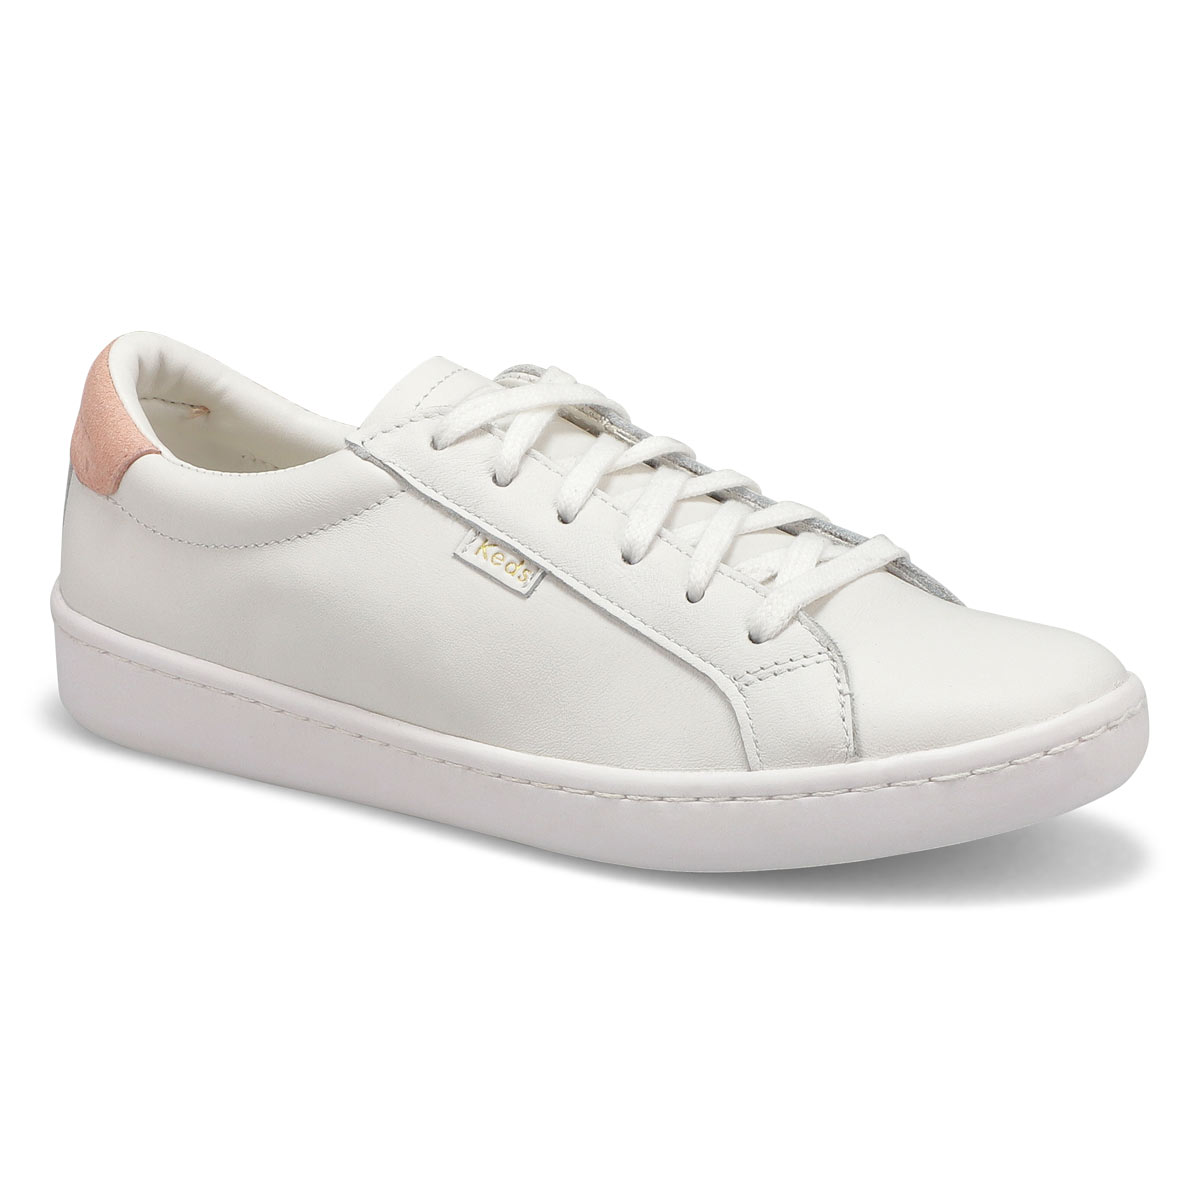 ACE white/blush leather sneaker 